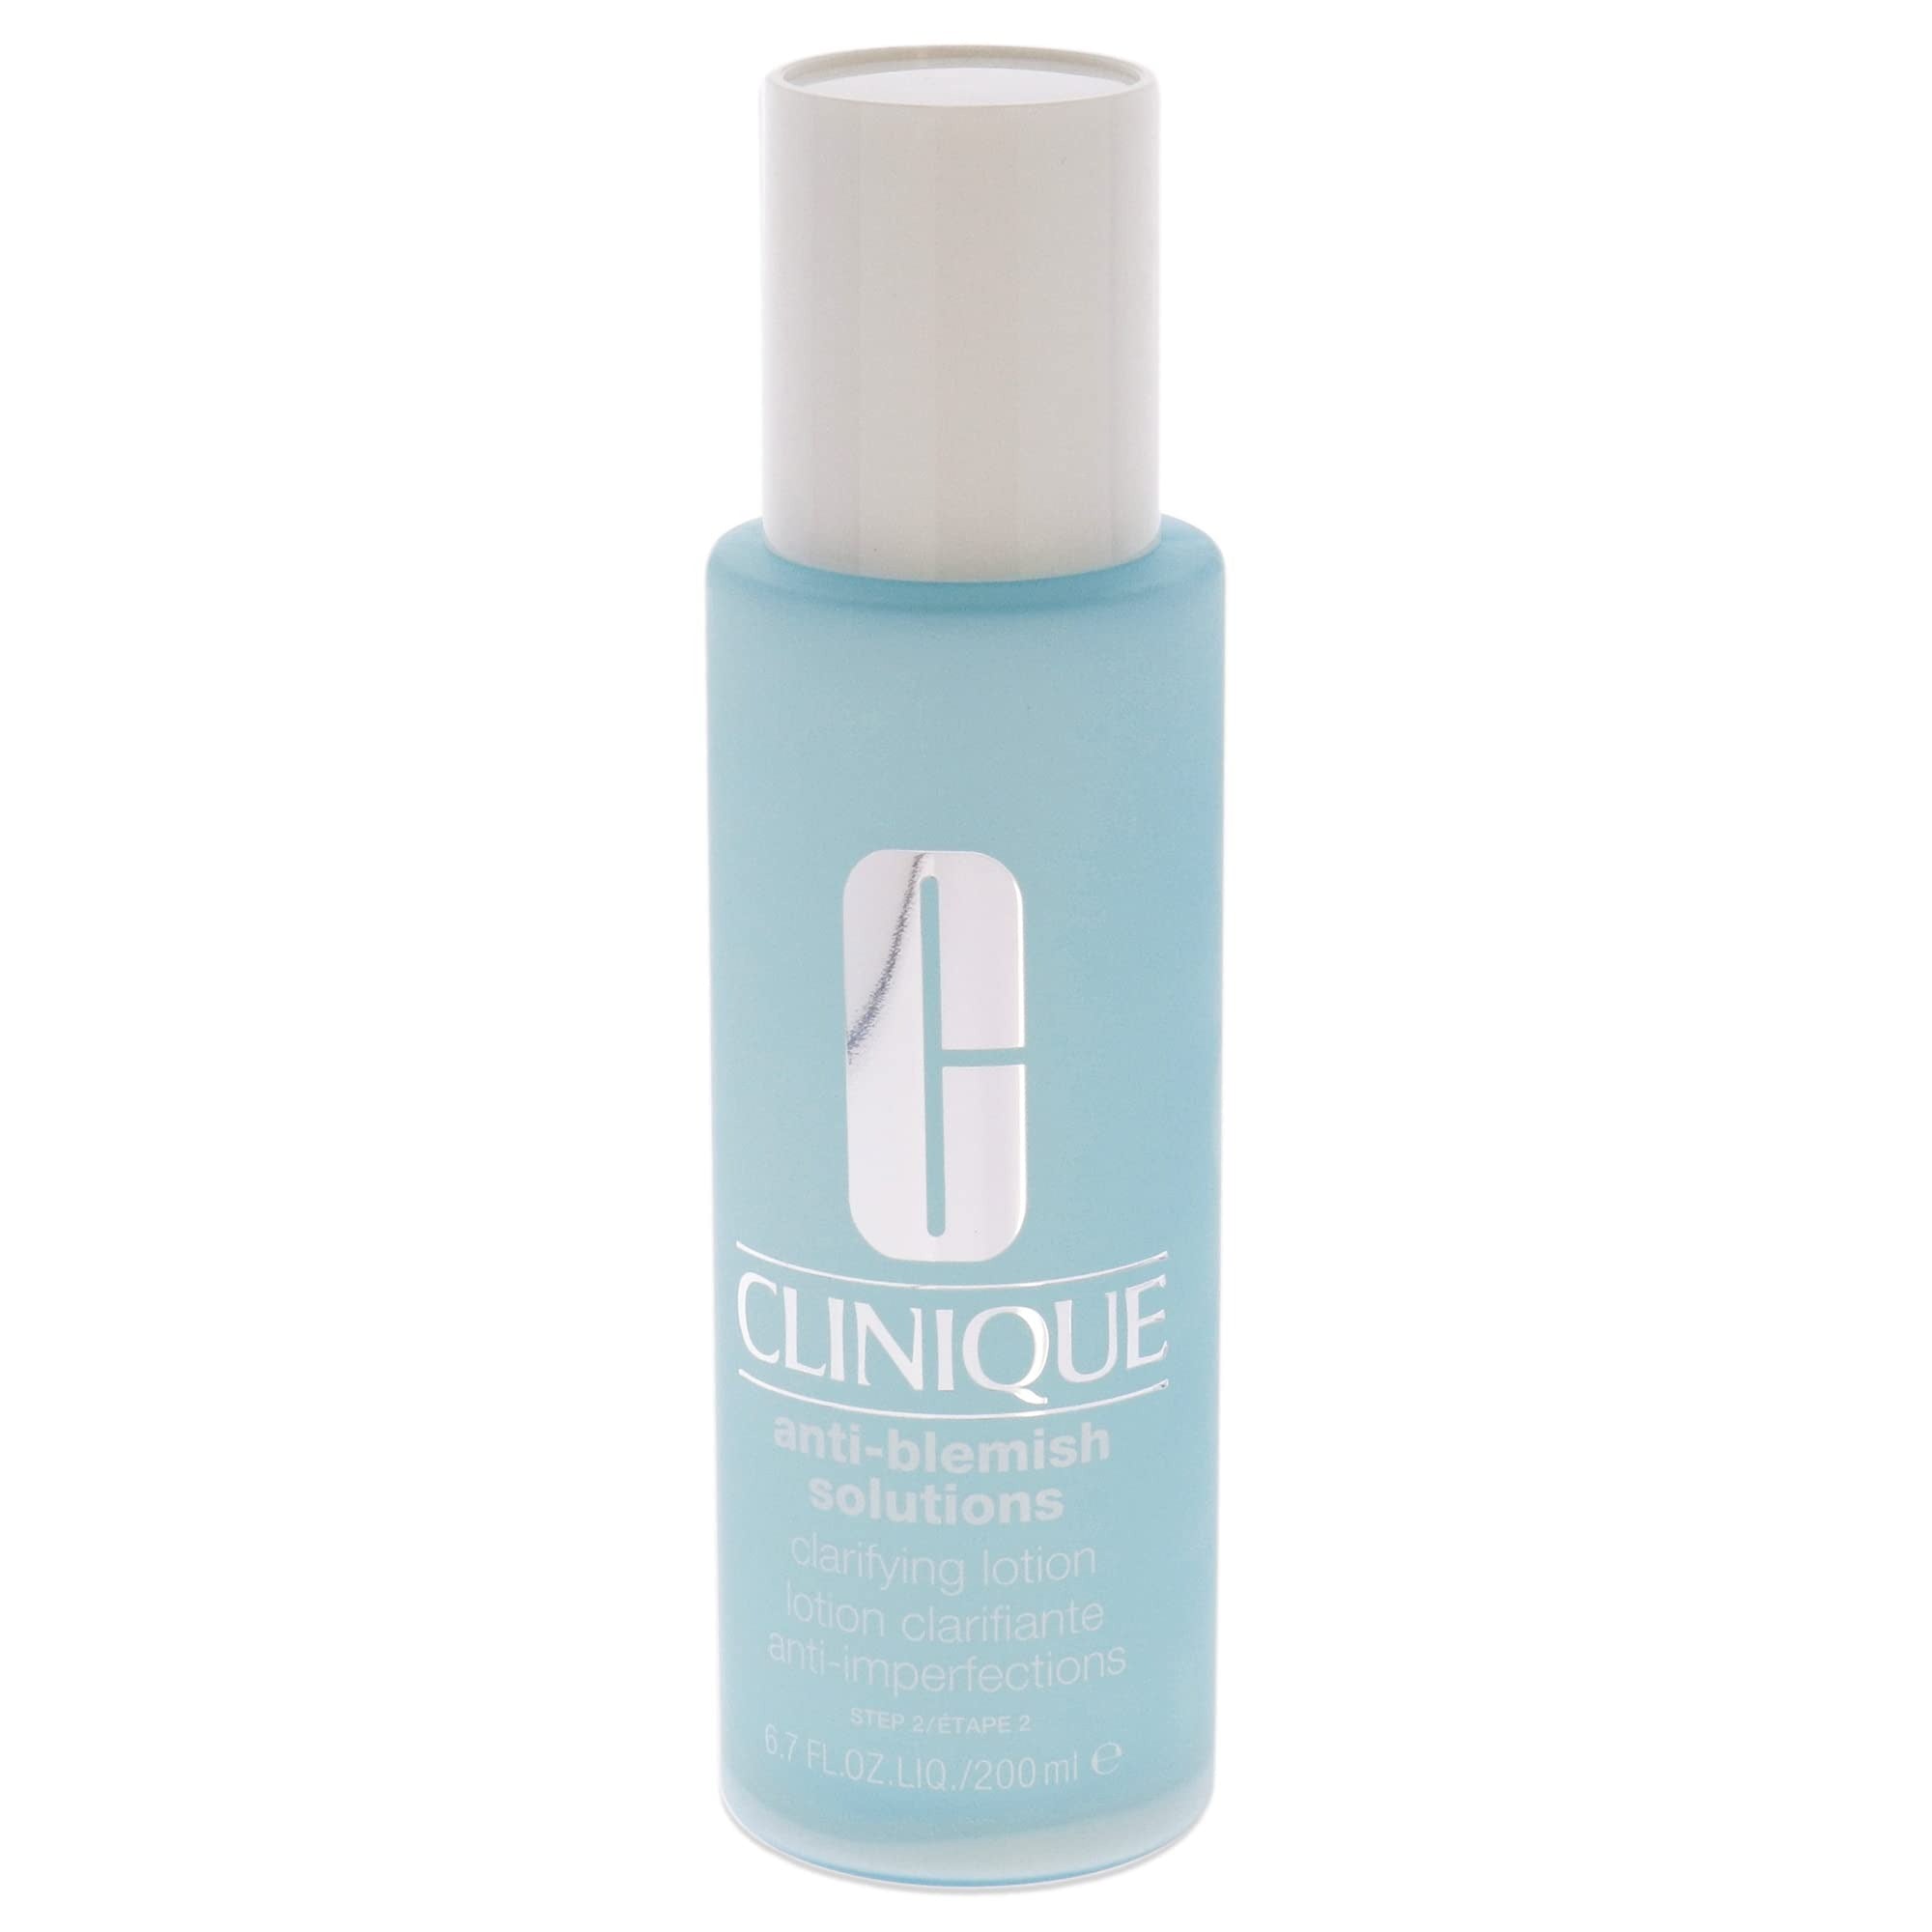 Anti-Blemish Solutions Clarifying Lotion by Clinique for Unisex - 6.7 oz Lotion